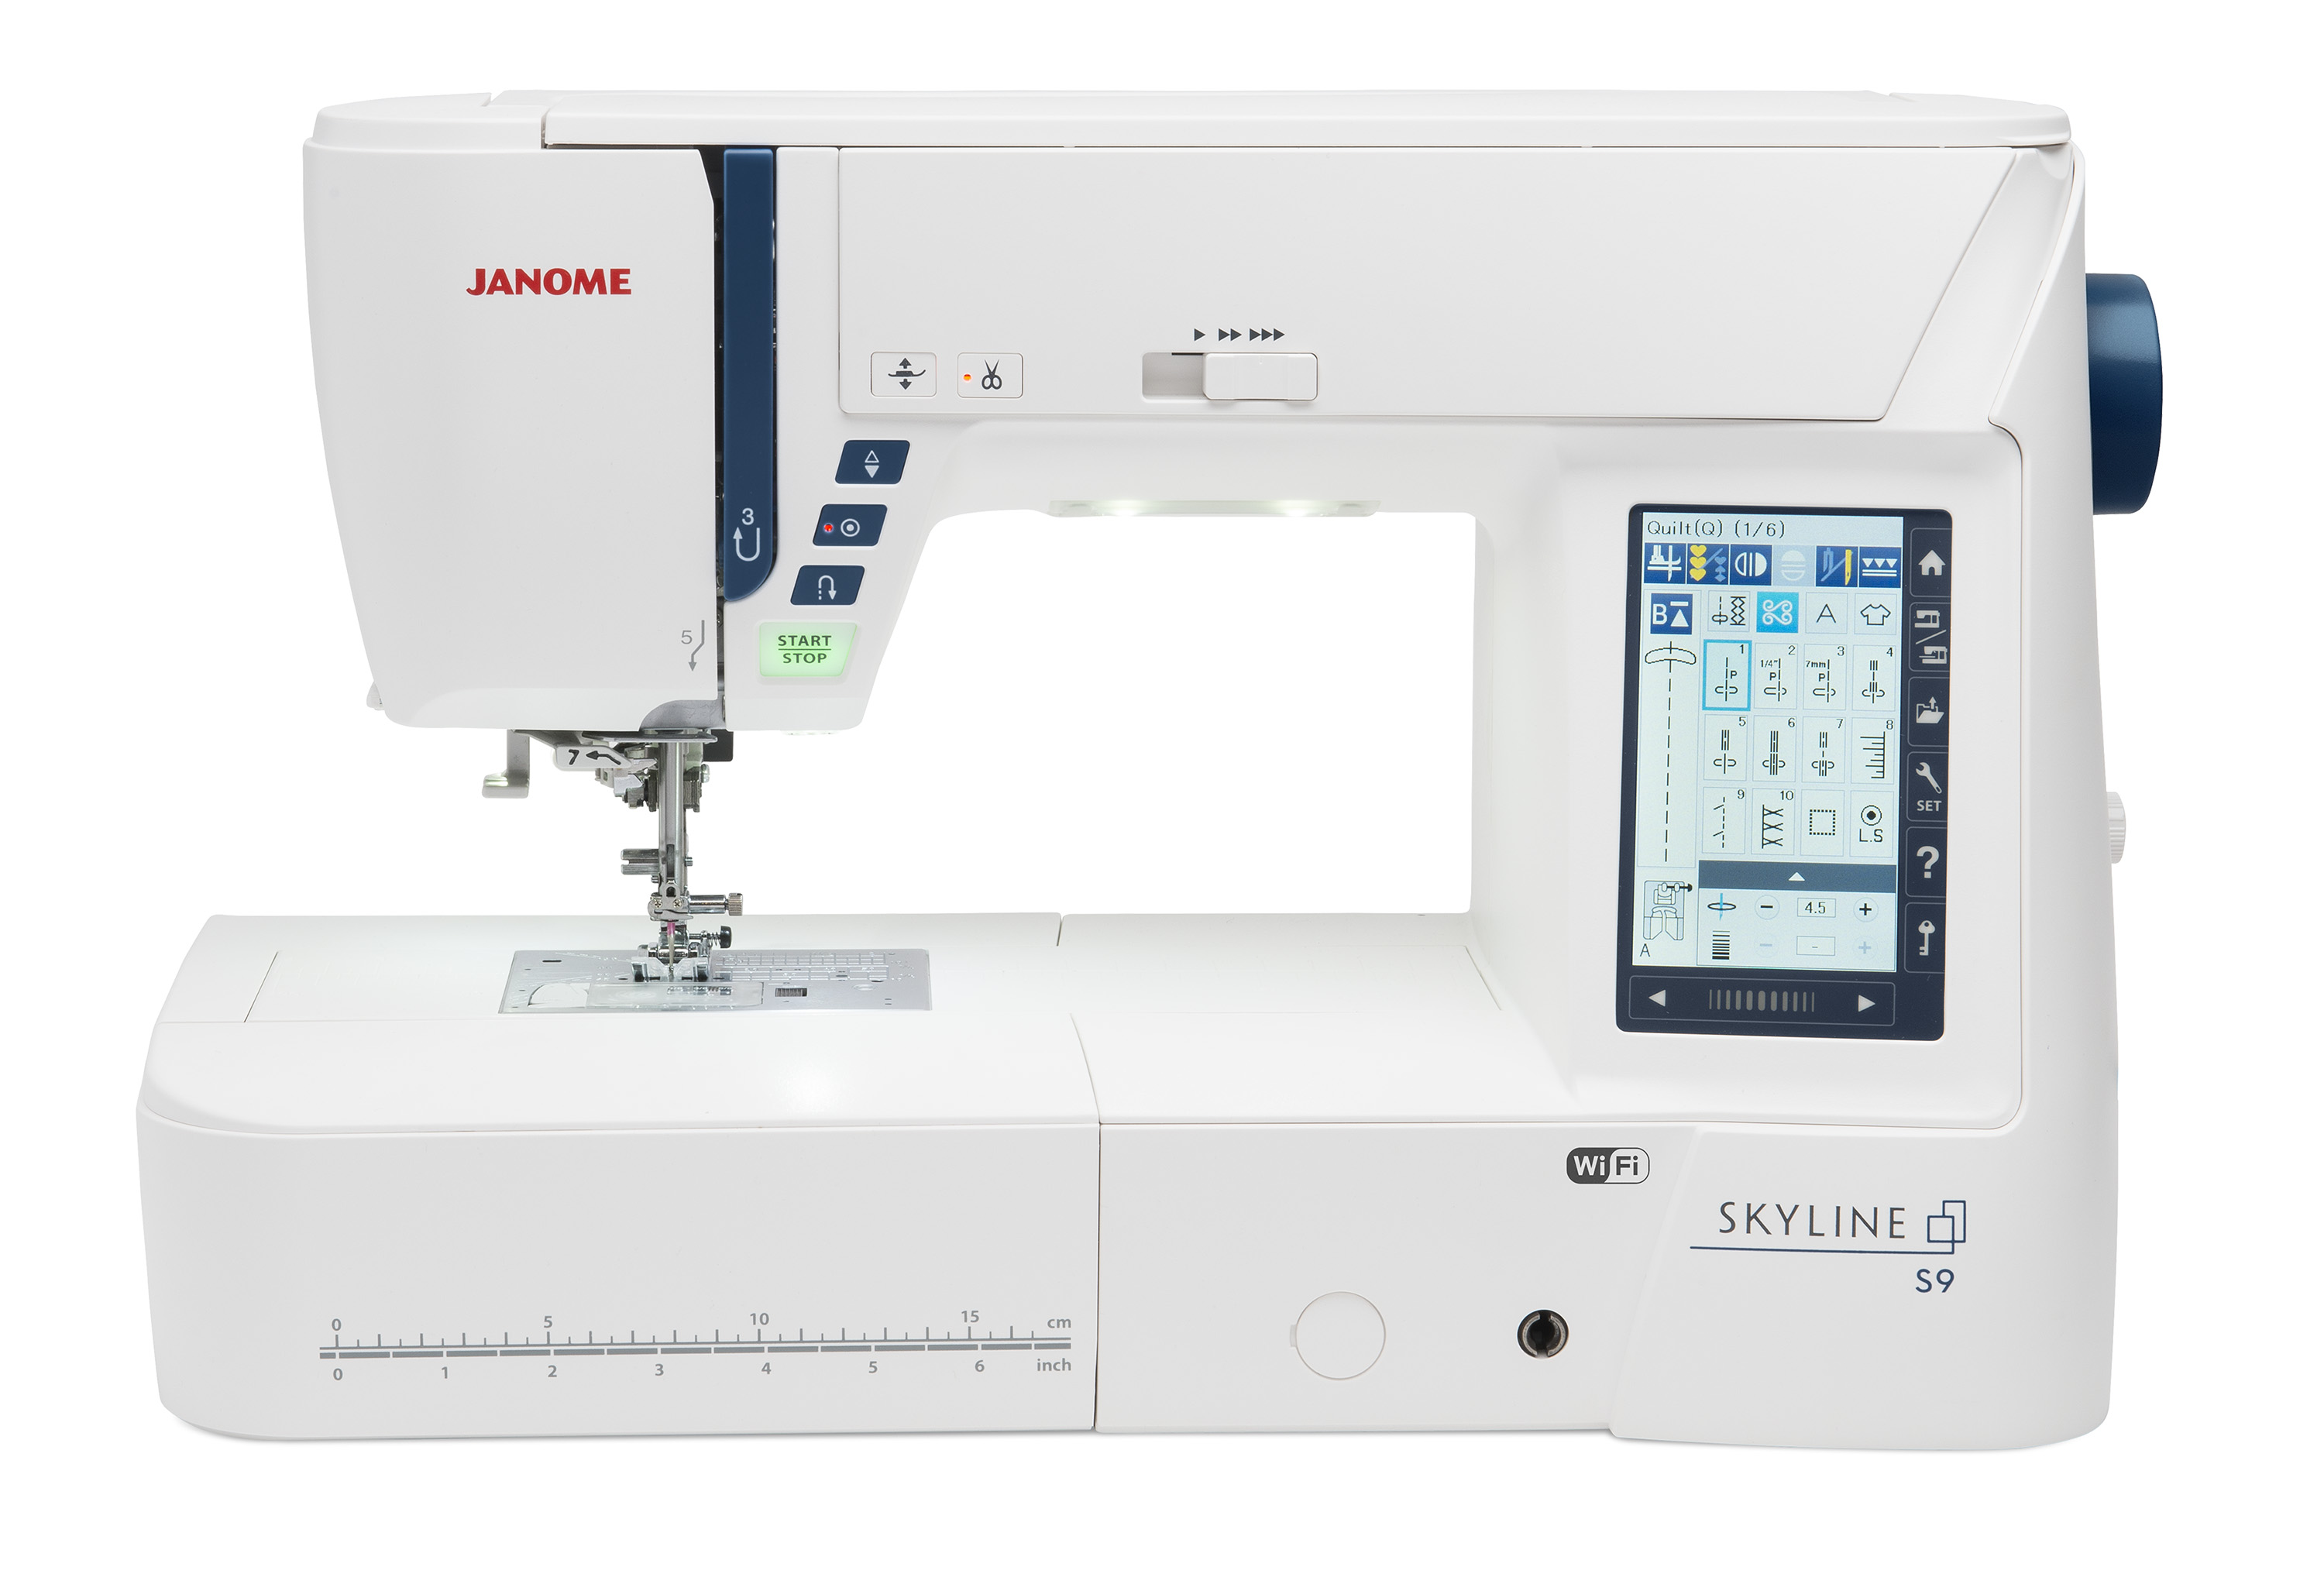 Janome Skyline S9 at K-W Sewing Machines